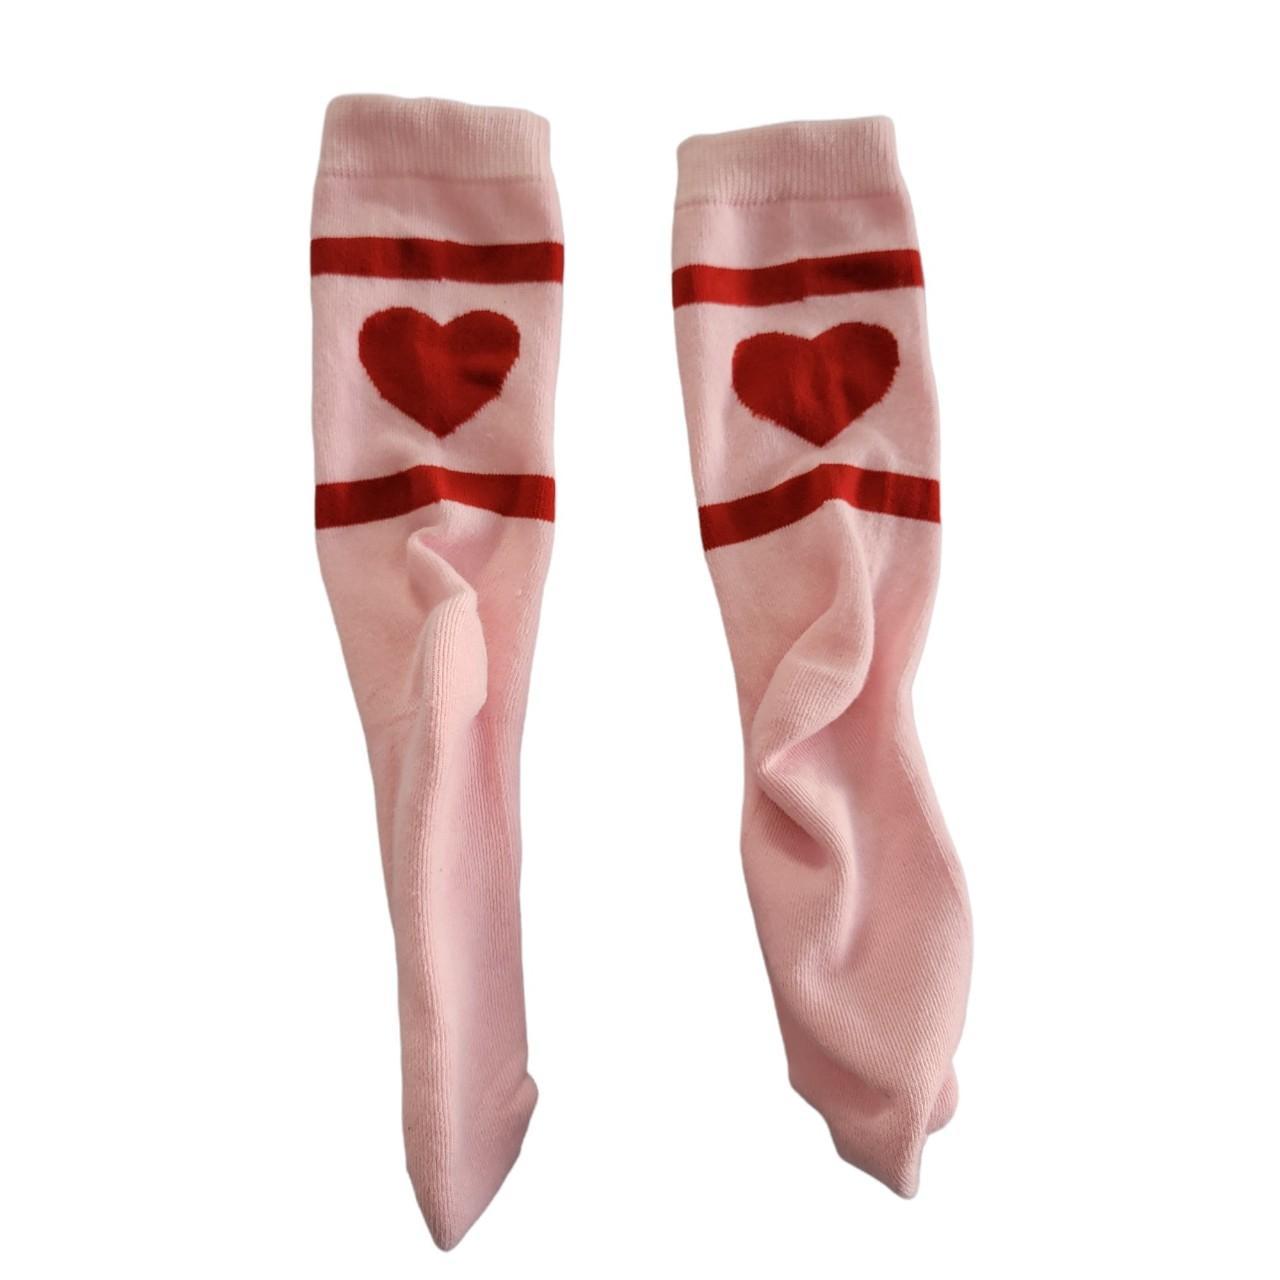 Hot Topic Women's Red and Pink Socks (2)